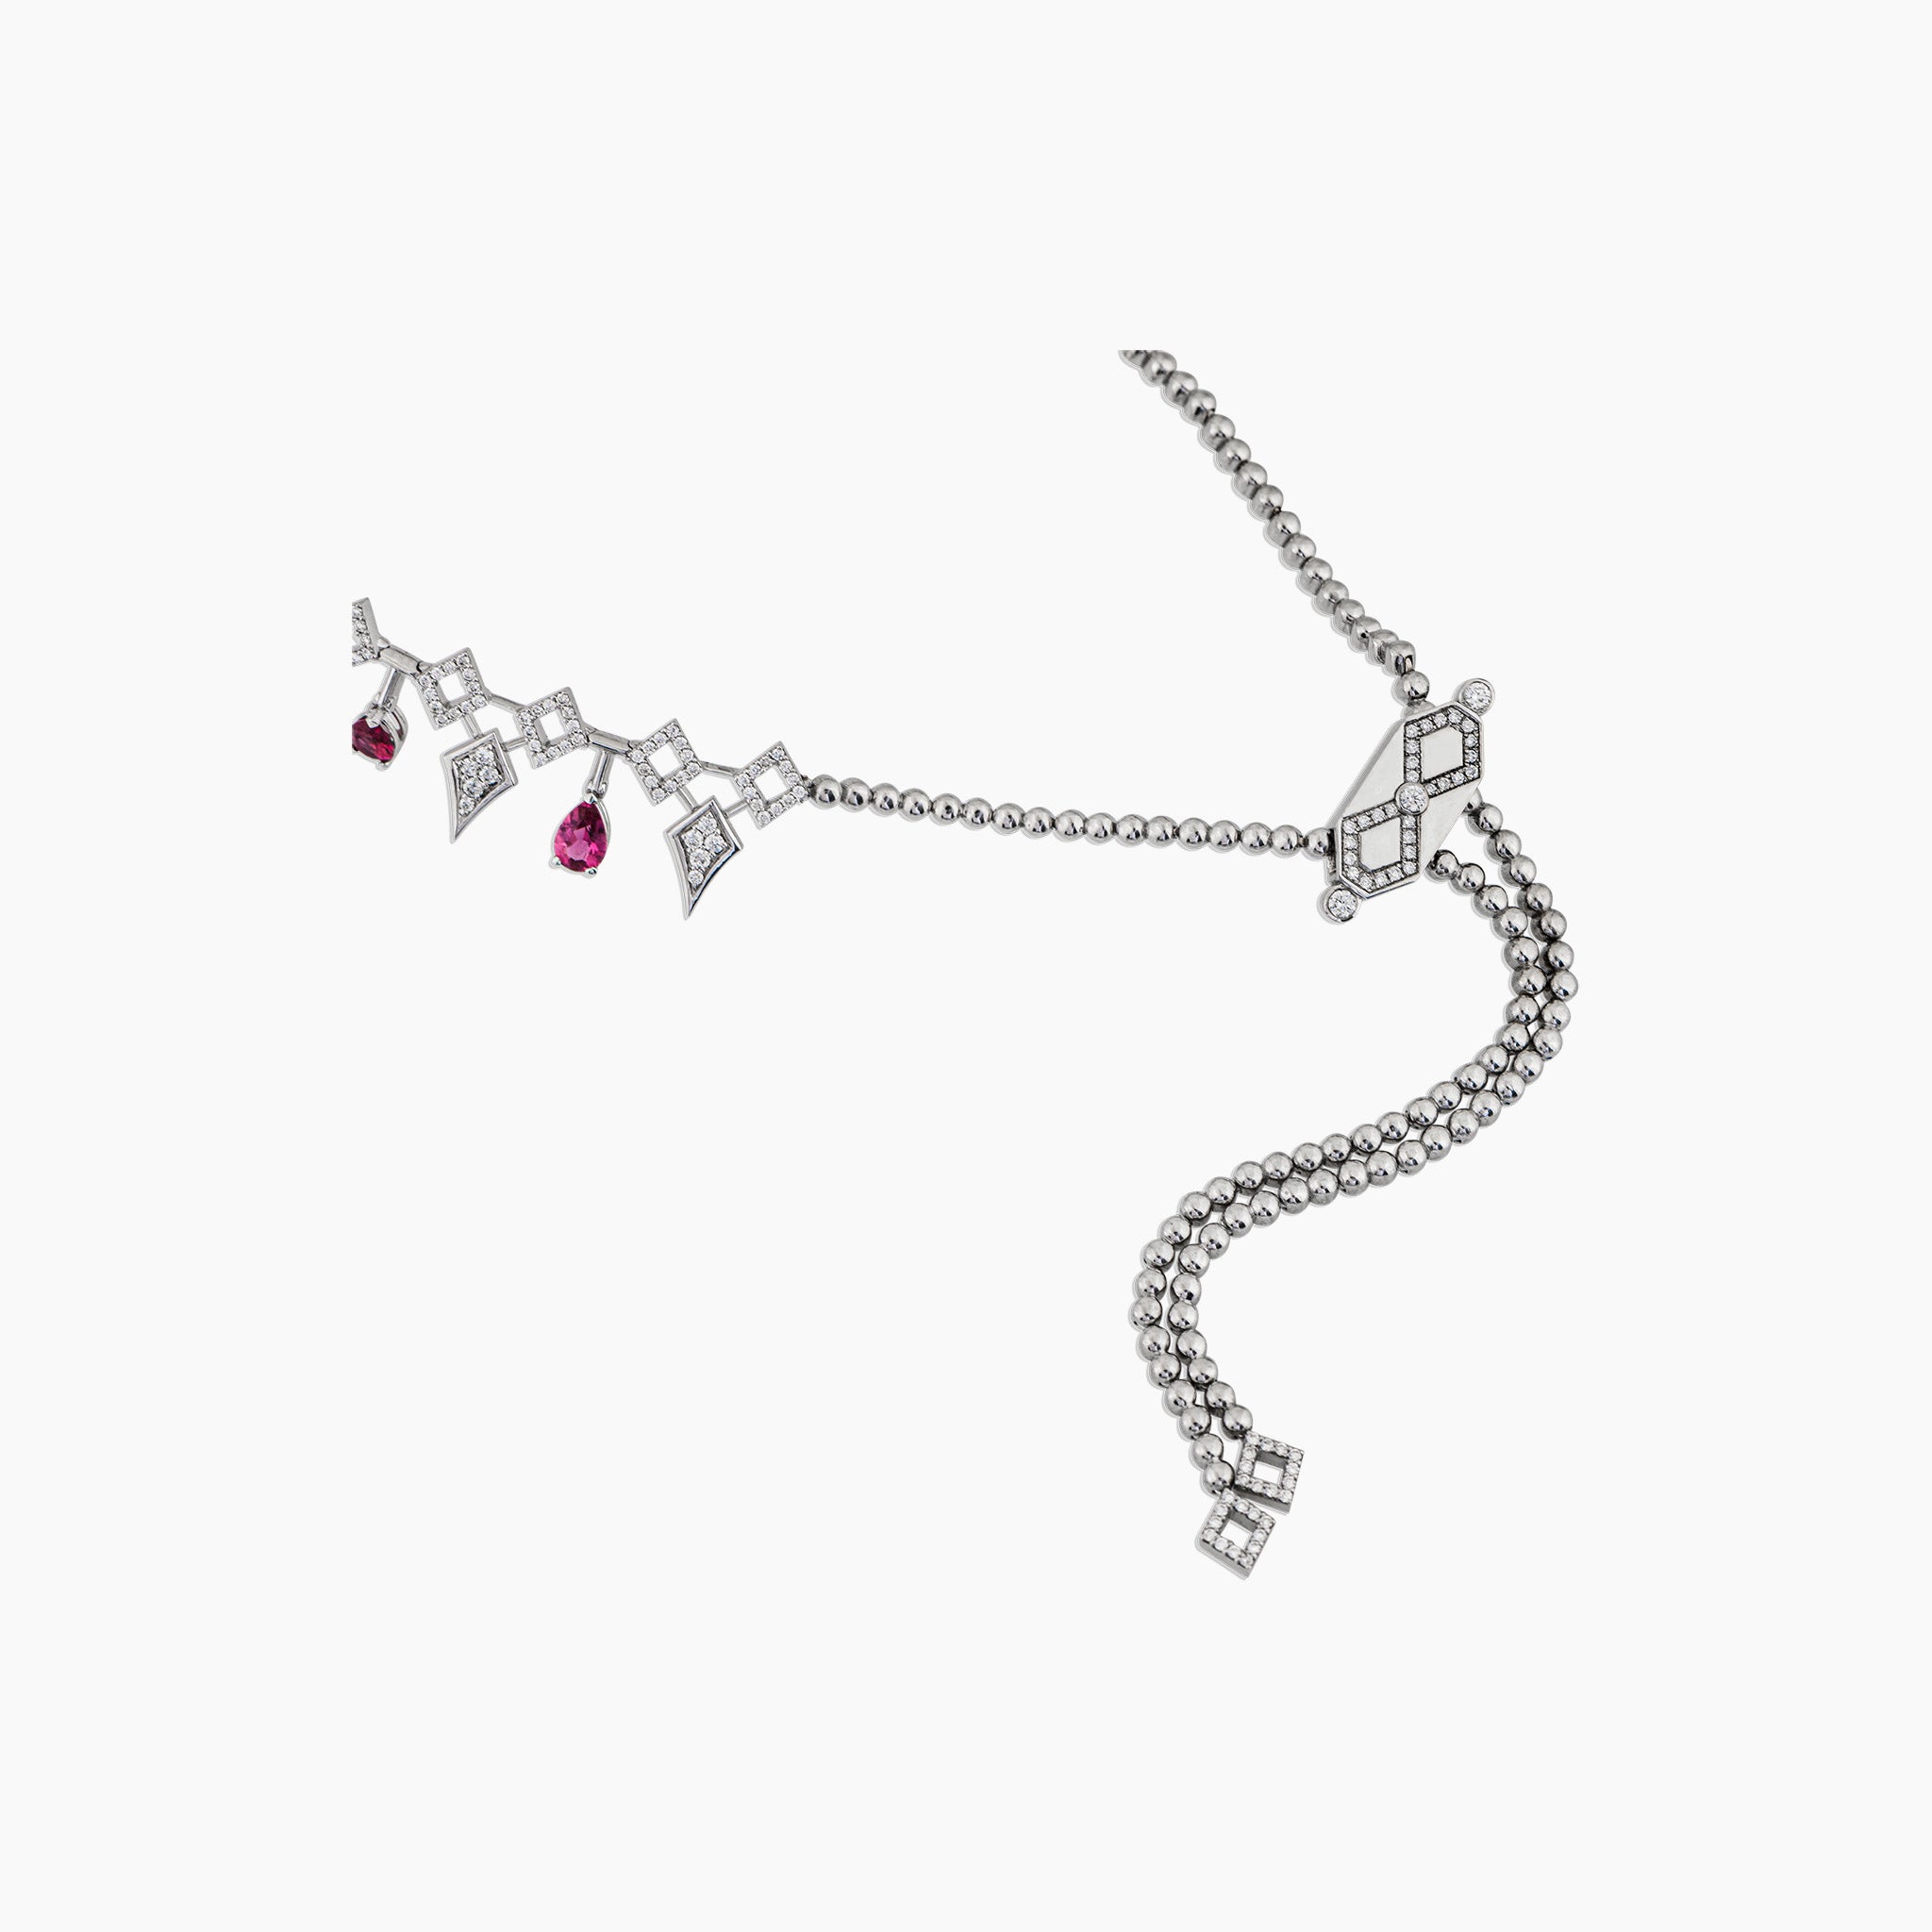 Inferno Choker: A captivating choker adorned with rubellite gemstones and diamonds set in white gold, presented against an off-white background.